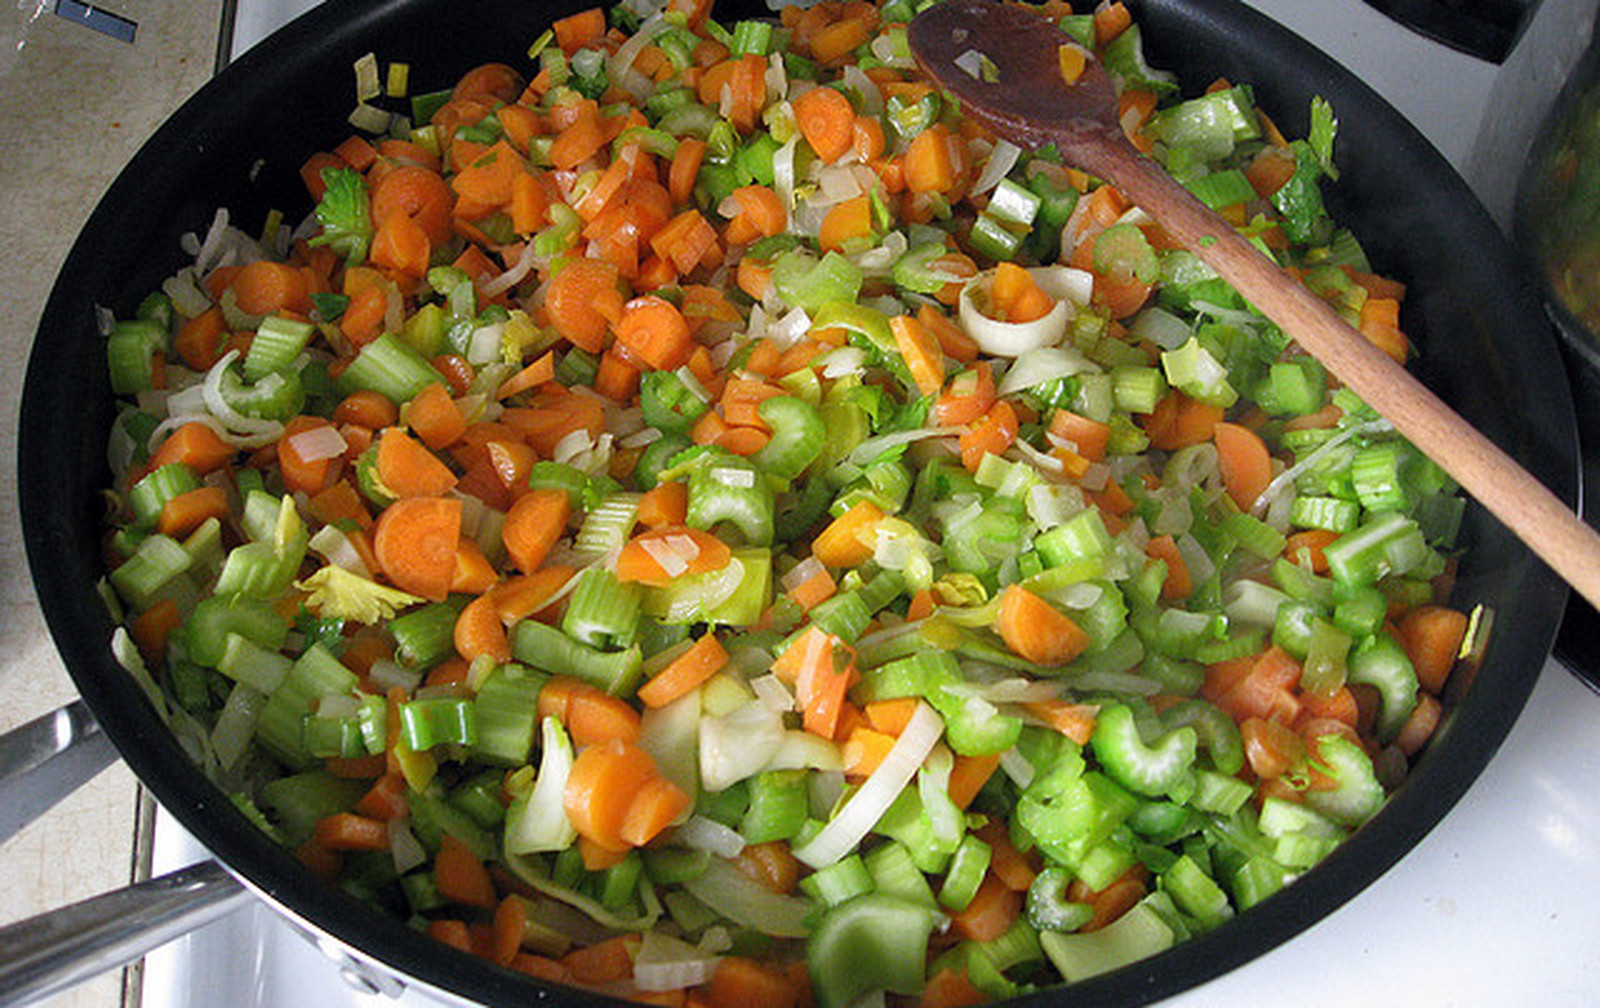 Cooking With Mirepoix: Why This Basic Veggie Trio Will Change Your Life!